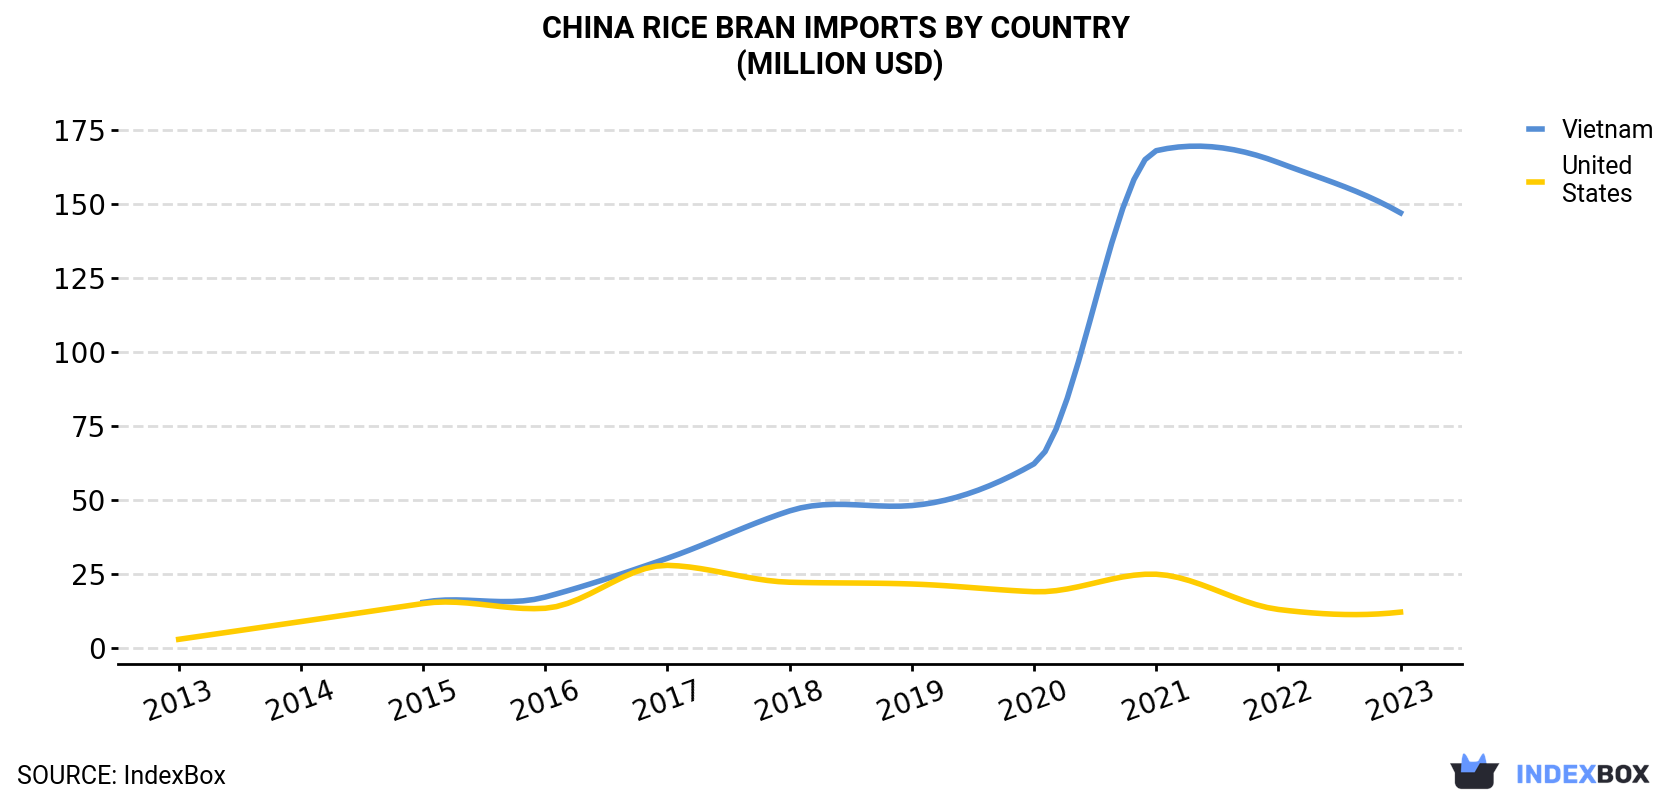 China Rice Bran Imports By Country (Million USD)